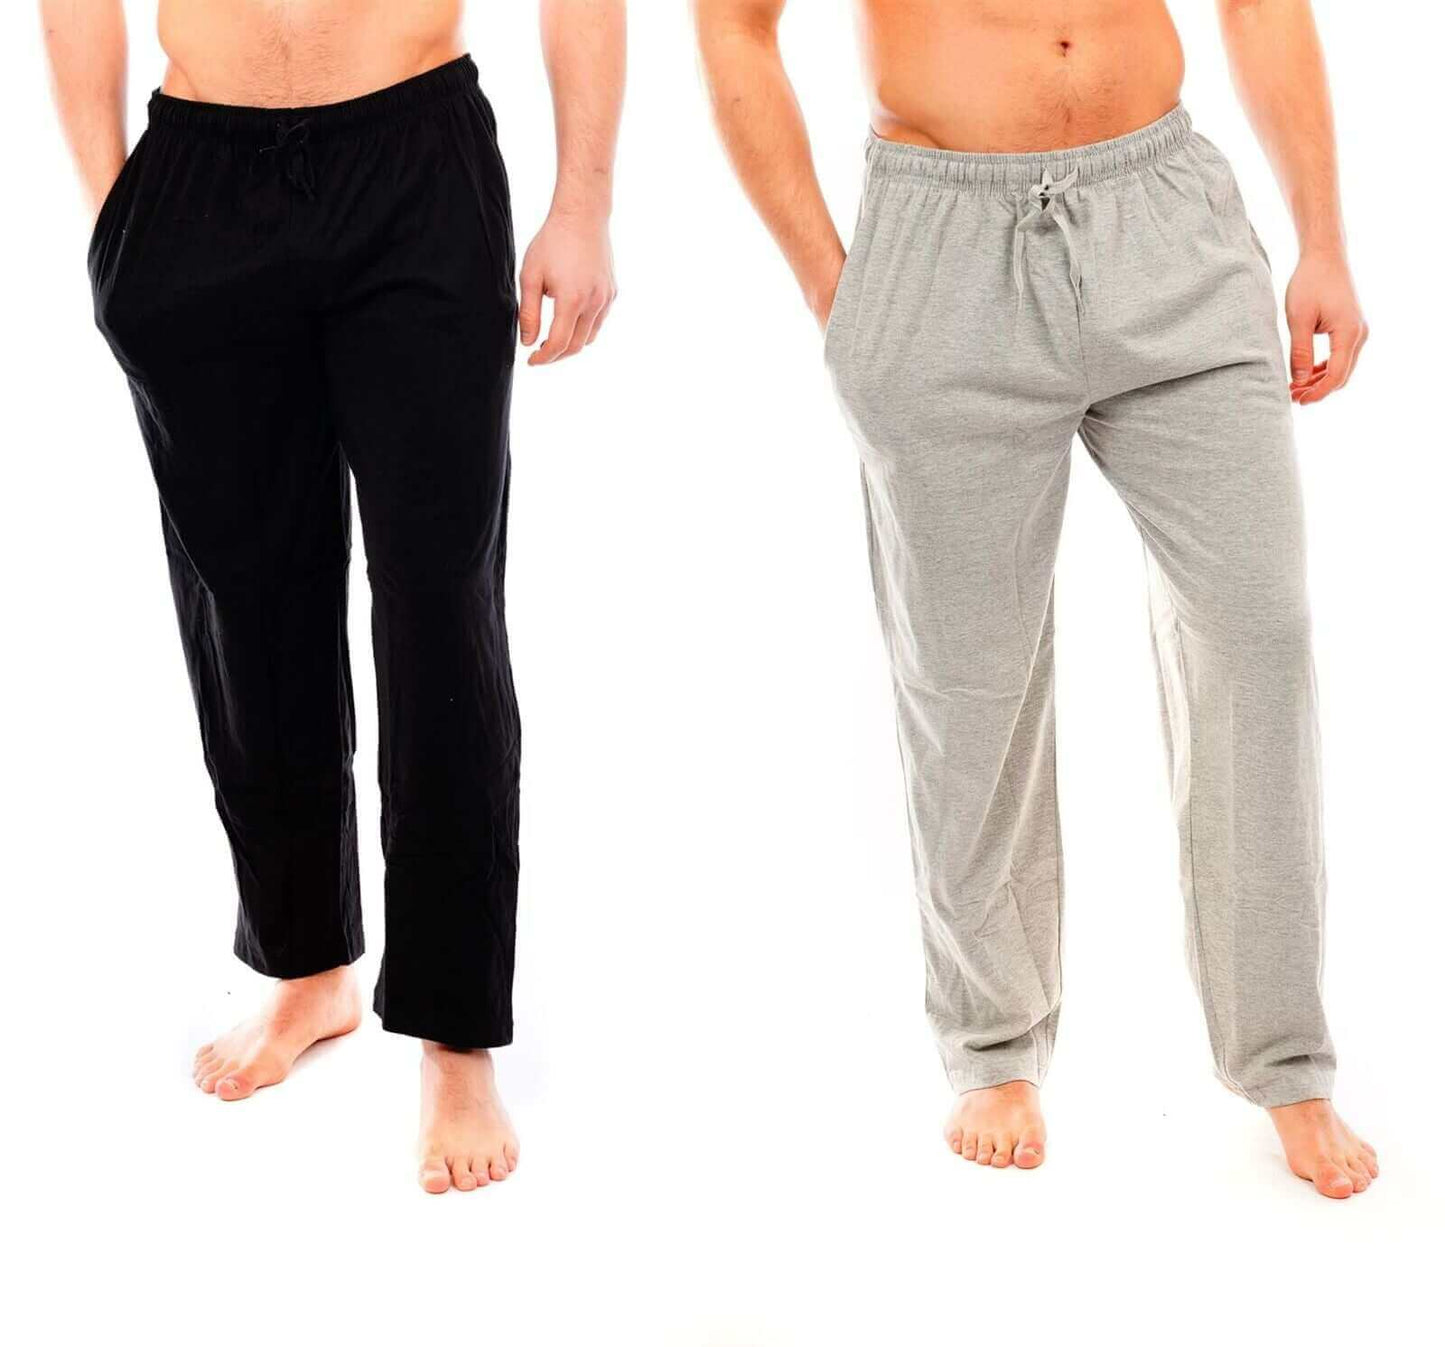 Pack of 2 Men's Lounge Bottoms Pyjama Pants Jersey PJ Bottom. Buy now for £15.00. A Lounge Pant by Sock Stack. 36-39, 3x large, 40-43, 41-44, 44-47, 47-50, 4x large, 50-53, 5x large, athletics, black, bottom, boys, comfortable, cotton, grey, home, jersey,